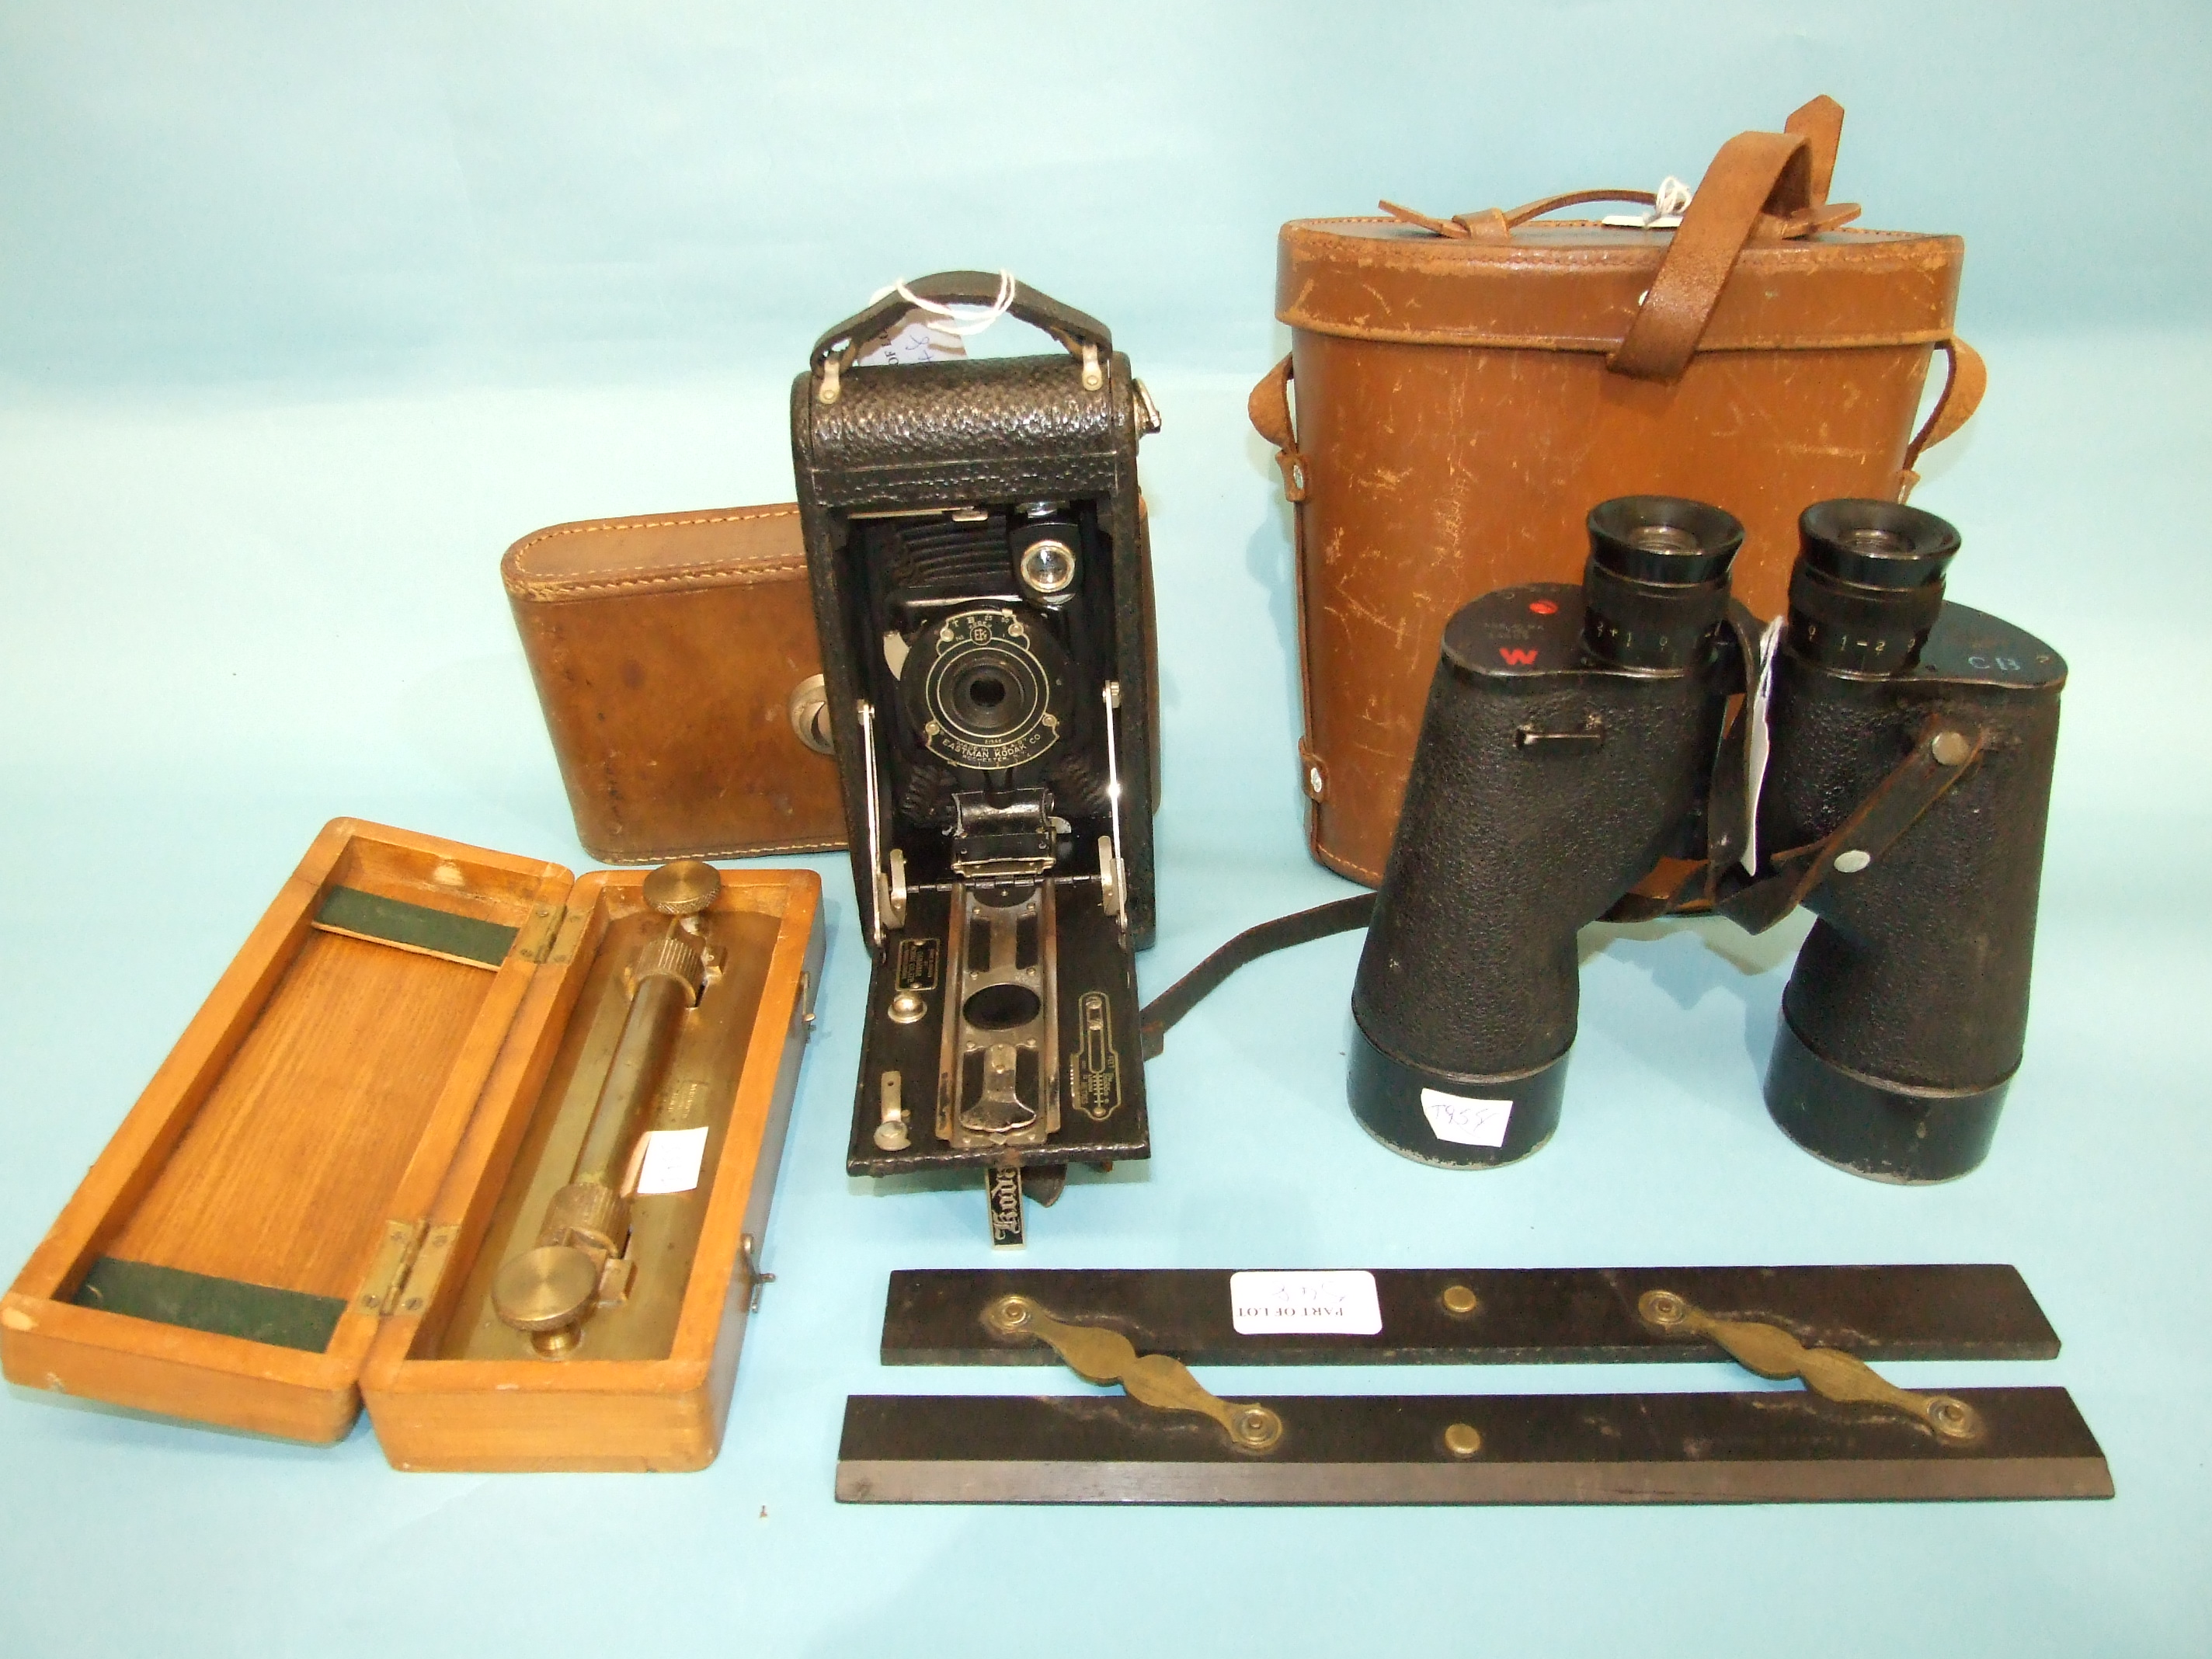 A pair of military issue 7x50 Canadian Navy binoculars marked 'CGB 40 MA 7x50 24509-C REL/CANADA